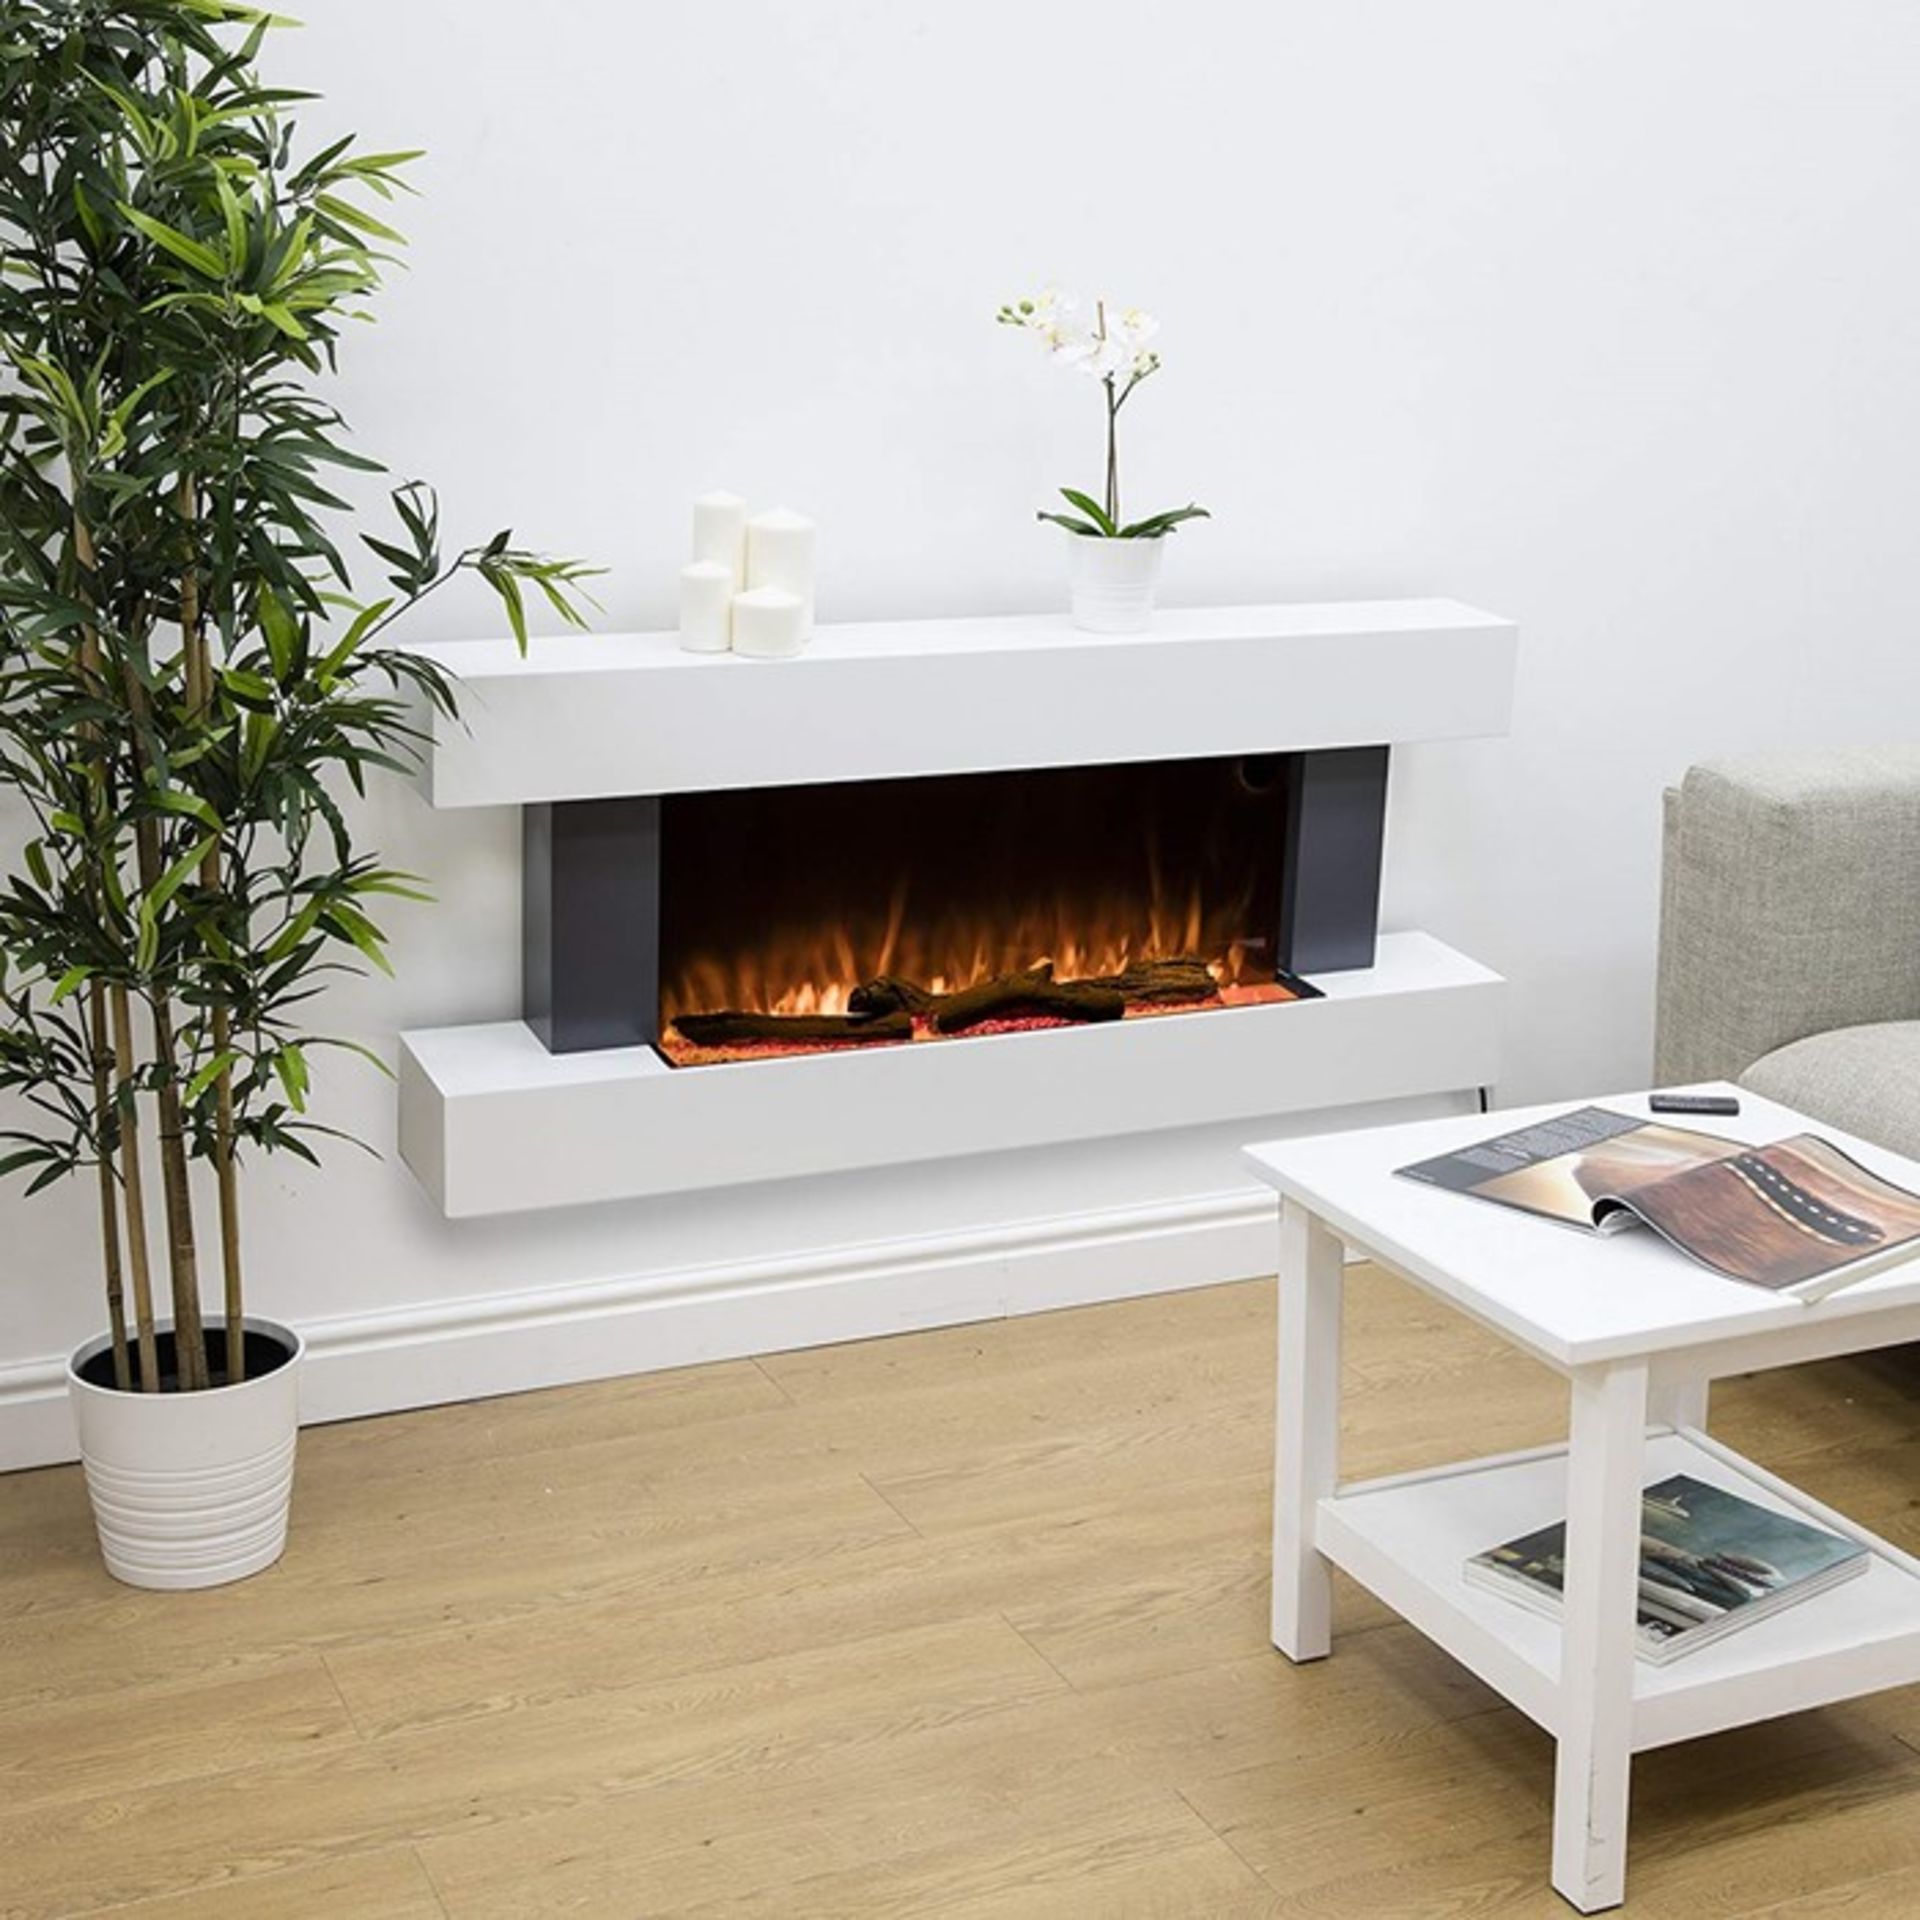 2000w Wall Mounted surround electric fire place suite with LED flame effect, new and boxed, features